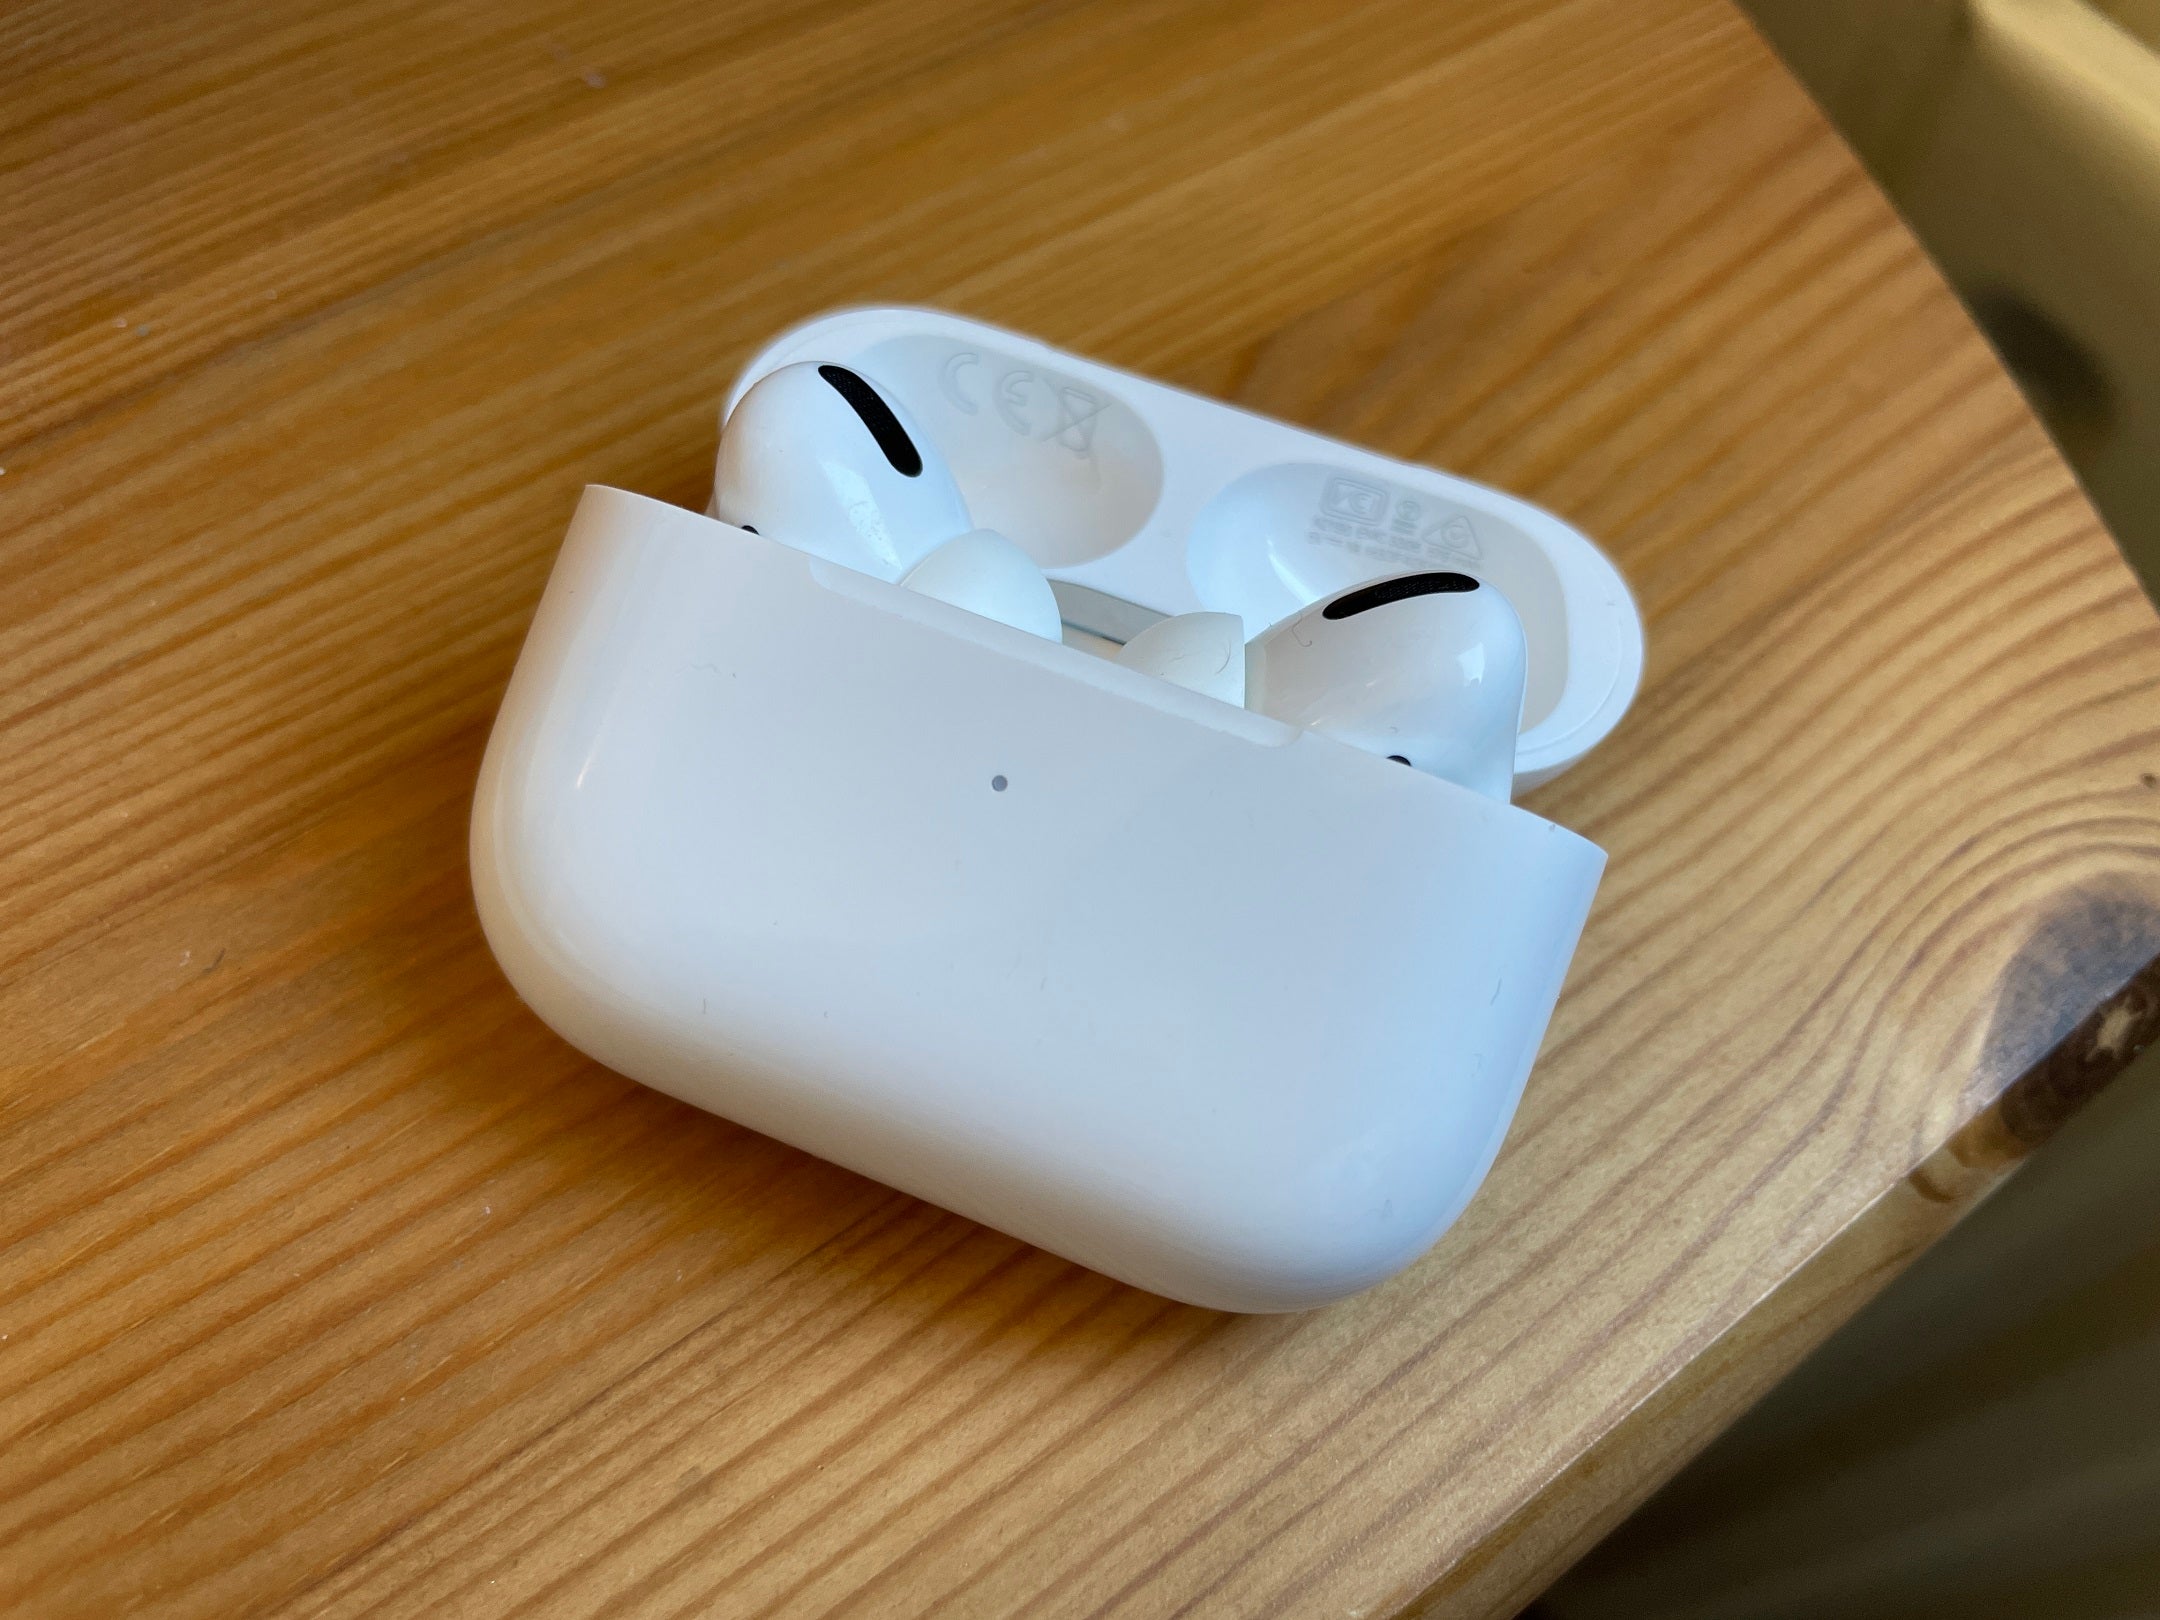 How to reset Apple AirPods Step-1